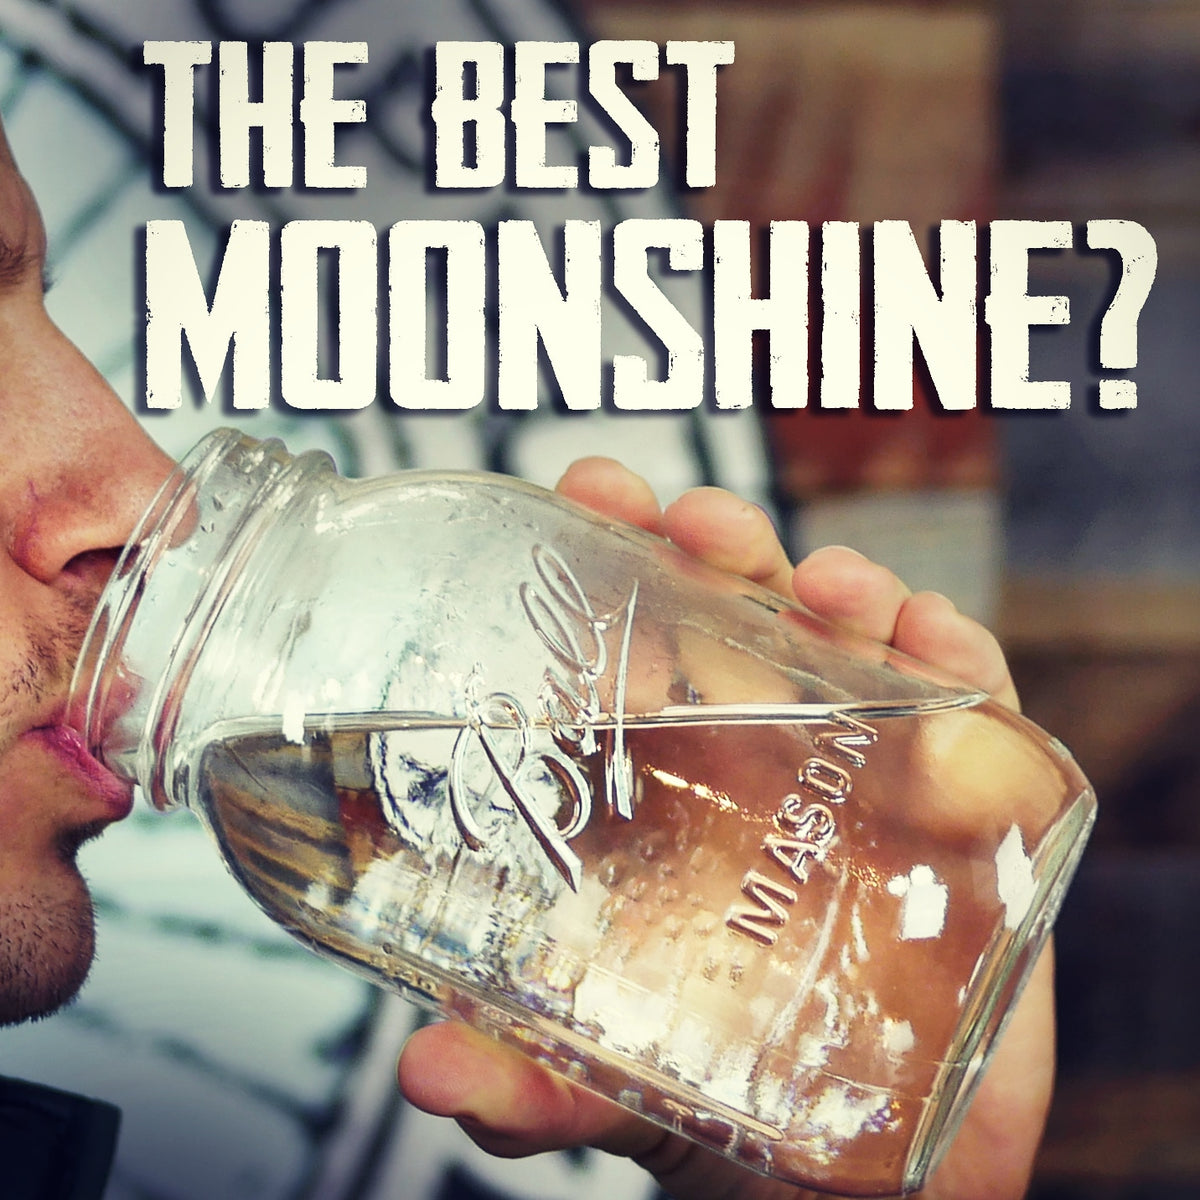 The Best Moonshine? Review of 3 different moonshine varieties